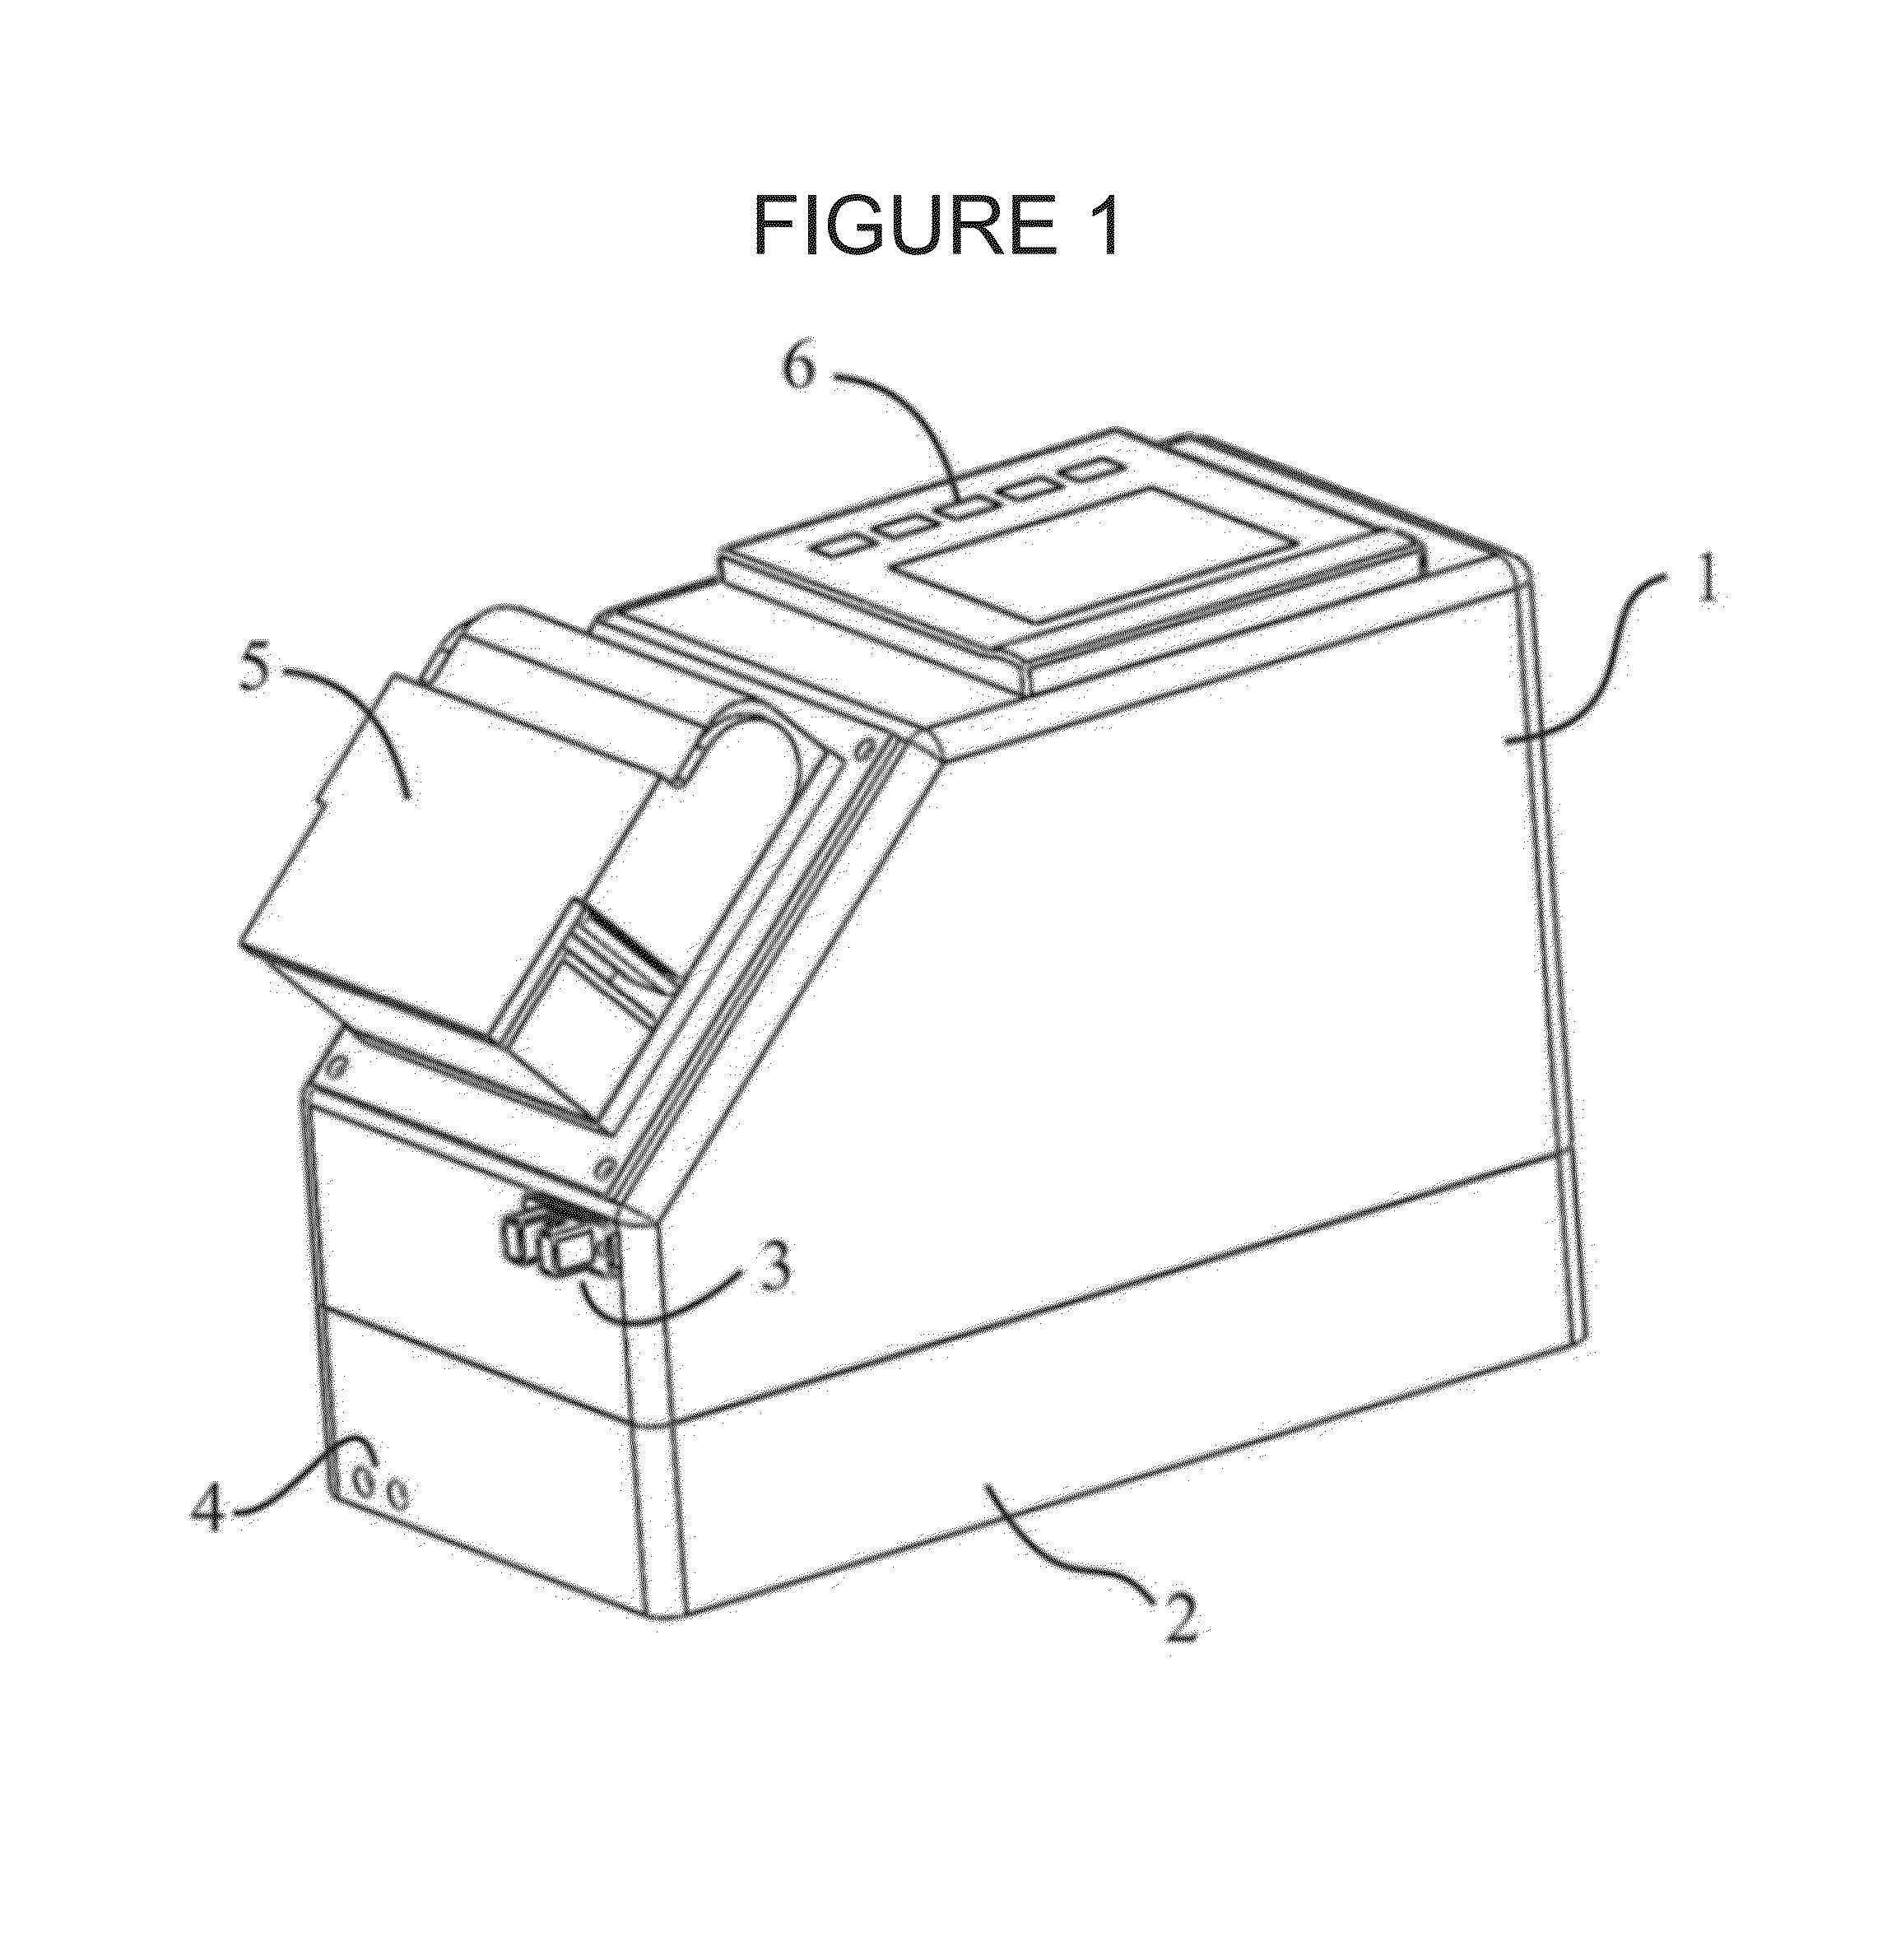 Apparatus for treatment of reperfusion injury